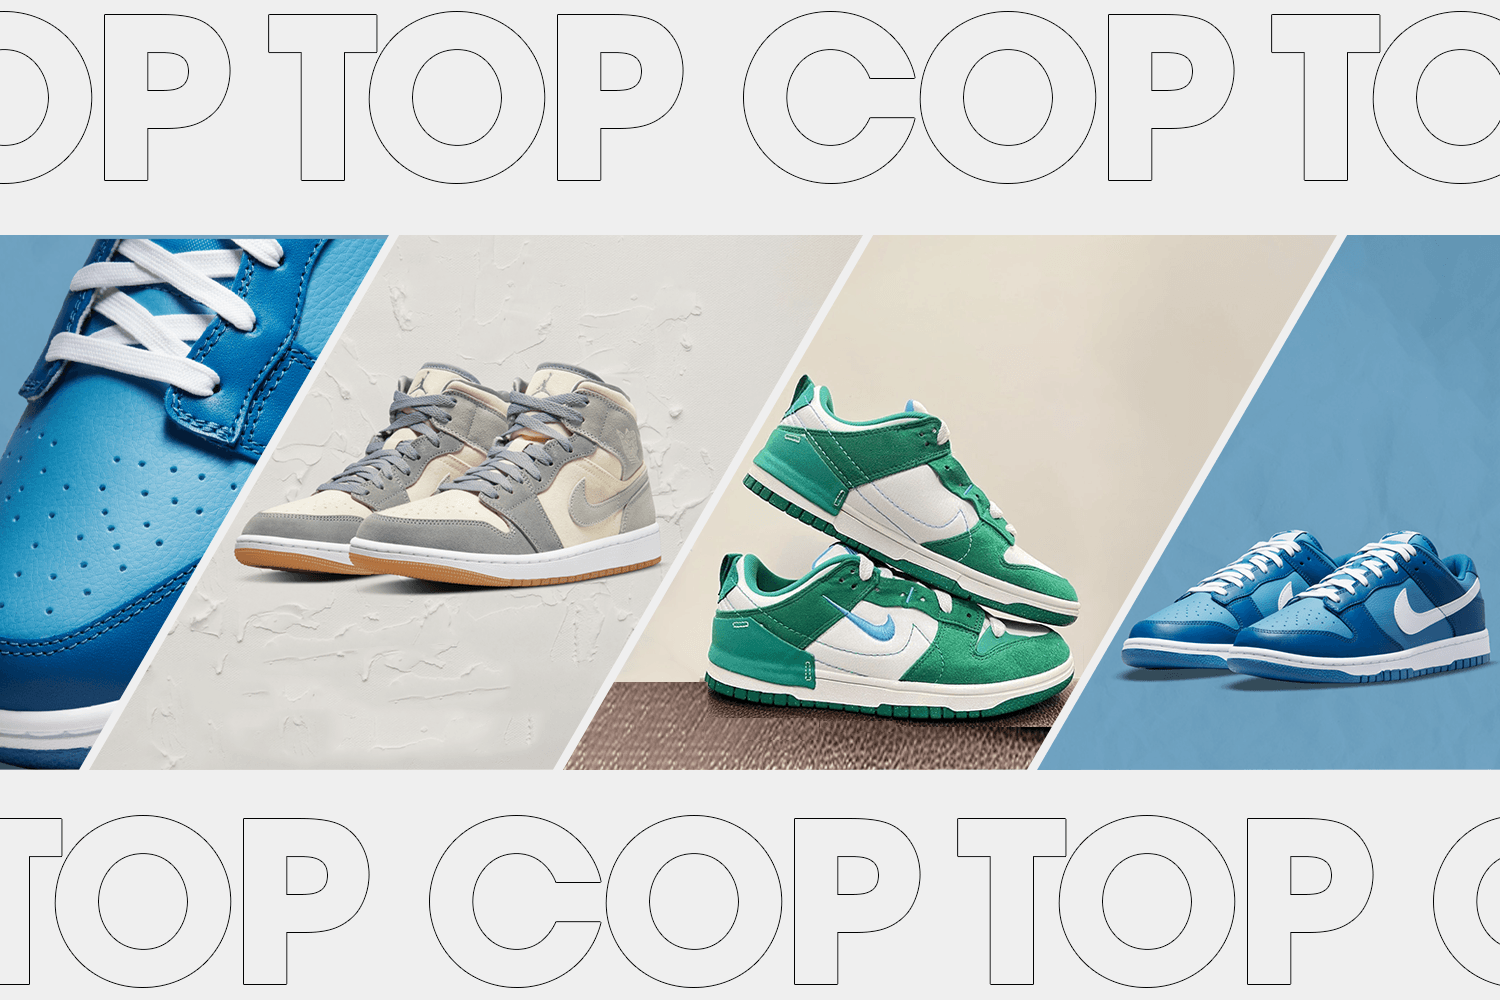 The community has voted: Your Top 3 Cop Sneaker - Week 5